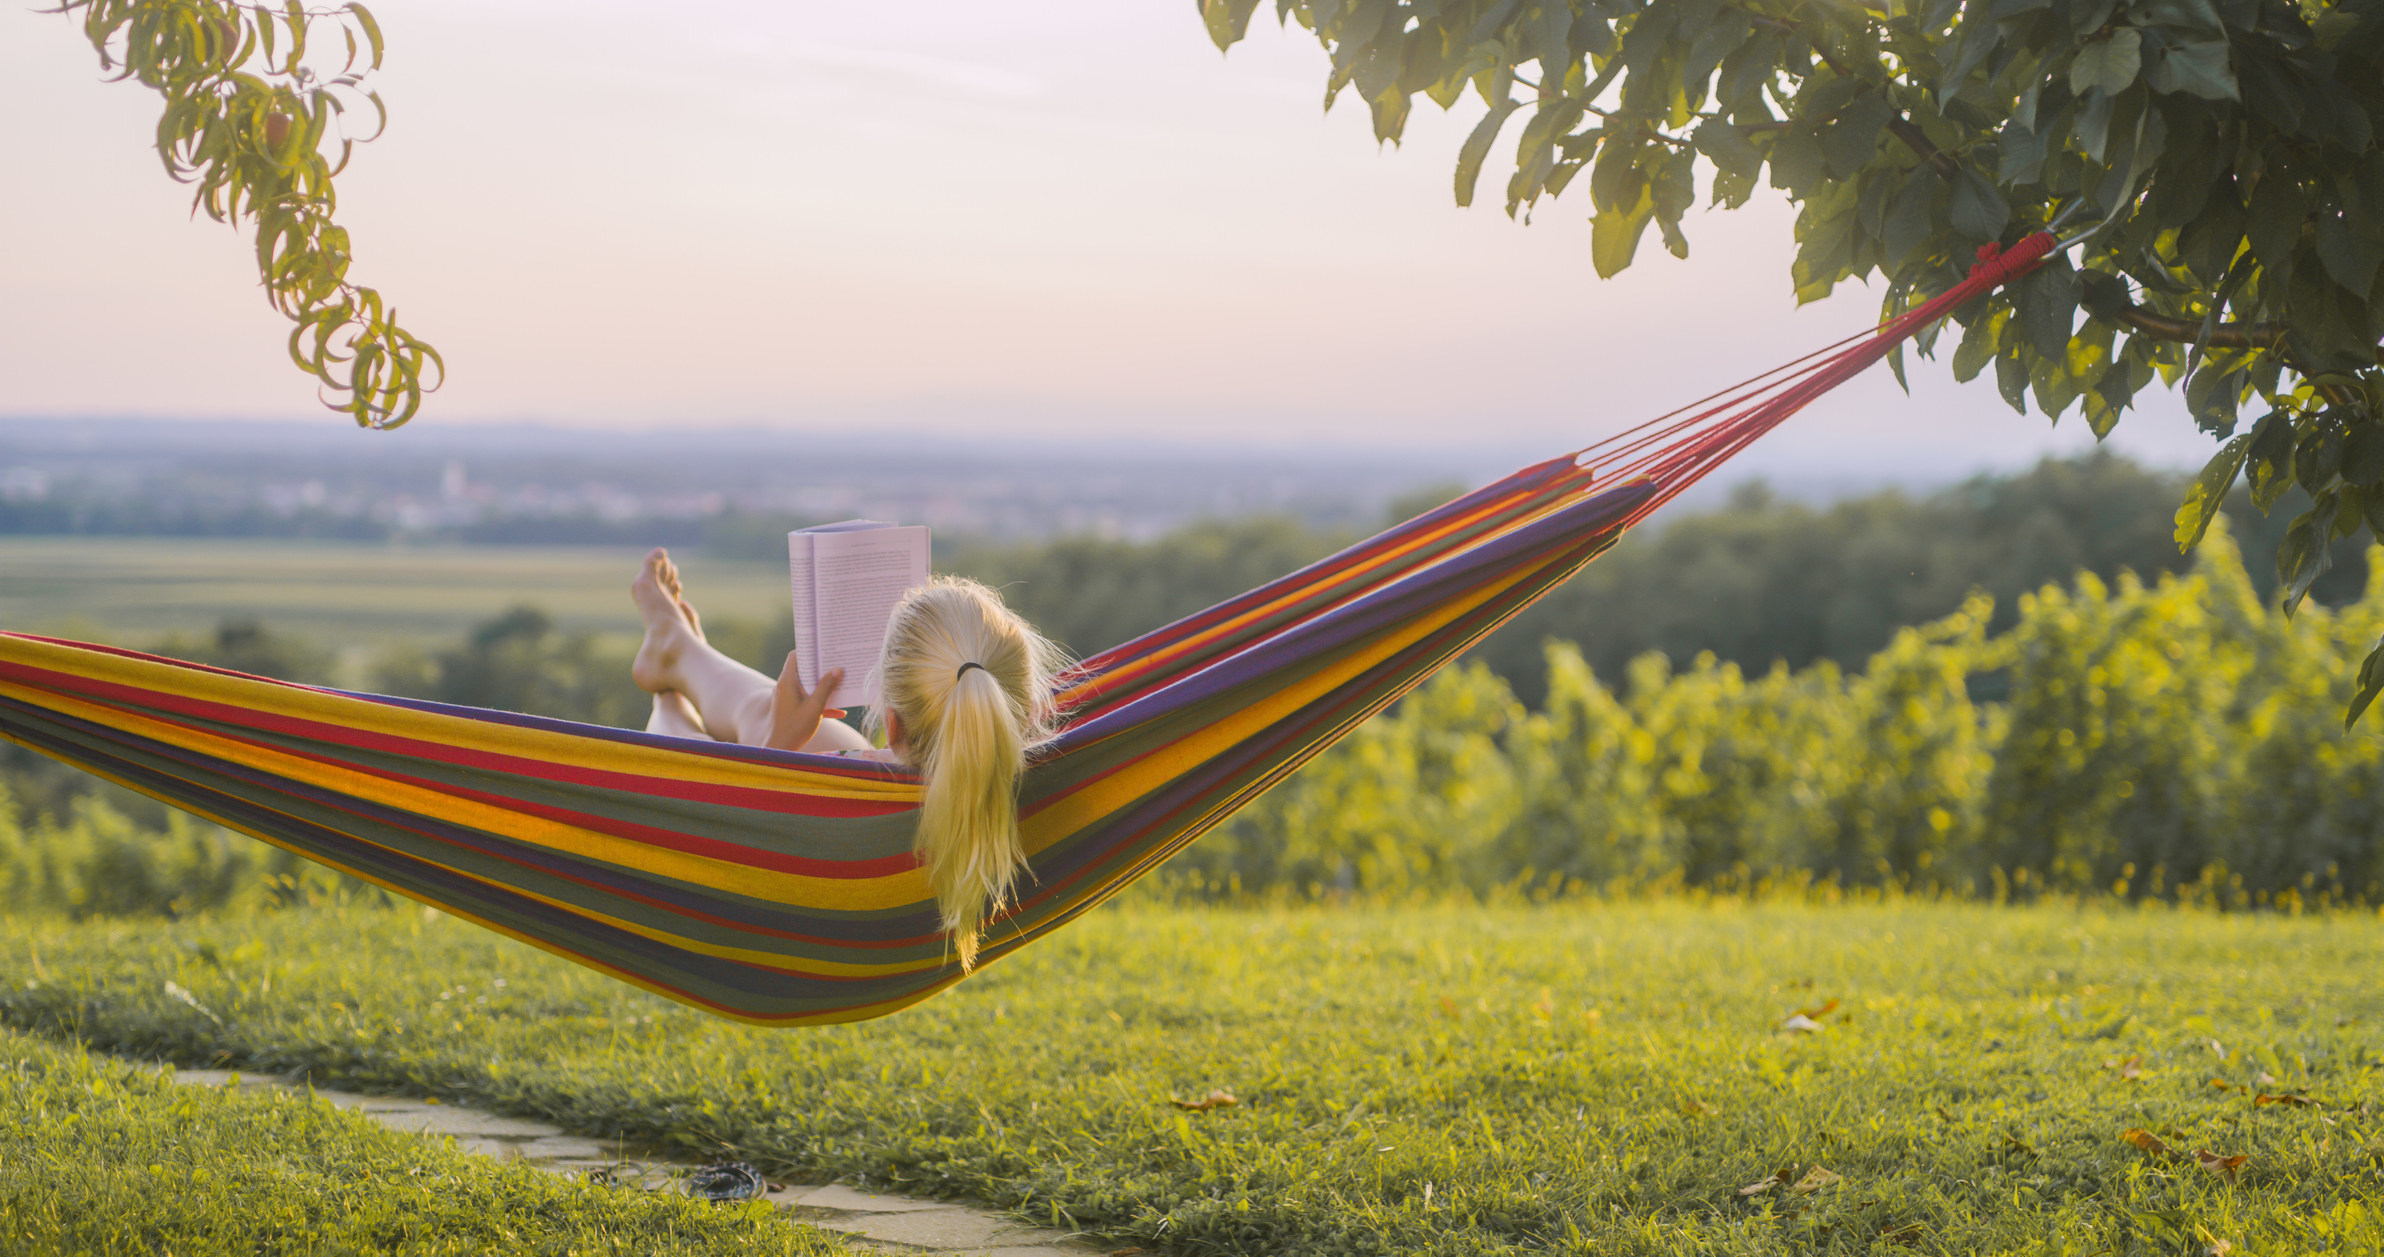 Woman reading a book in hammock in the nature.